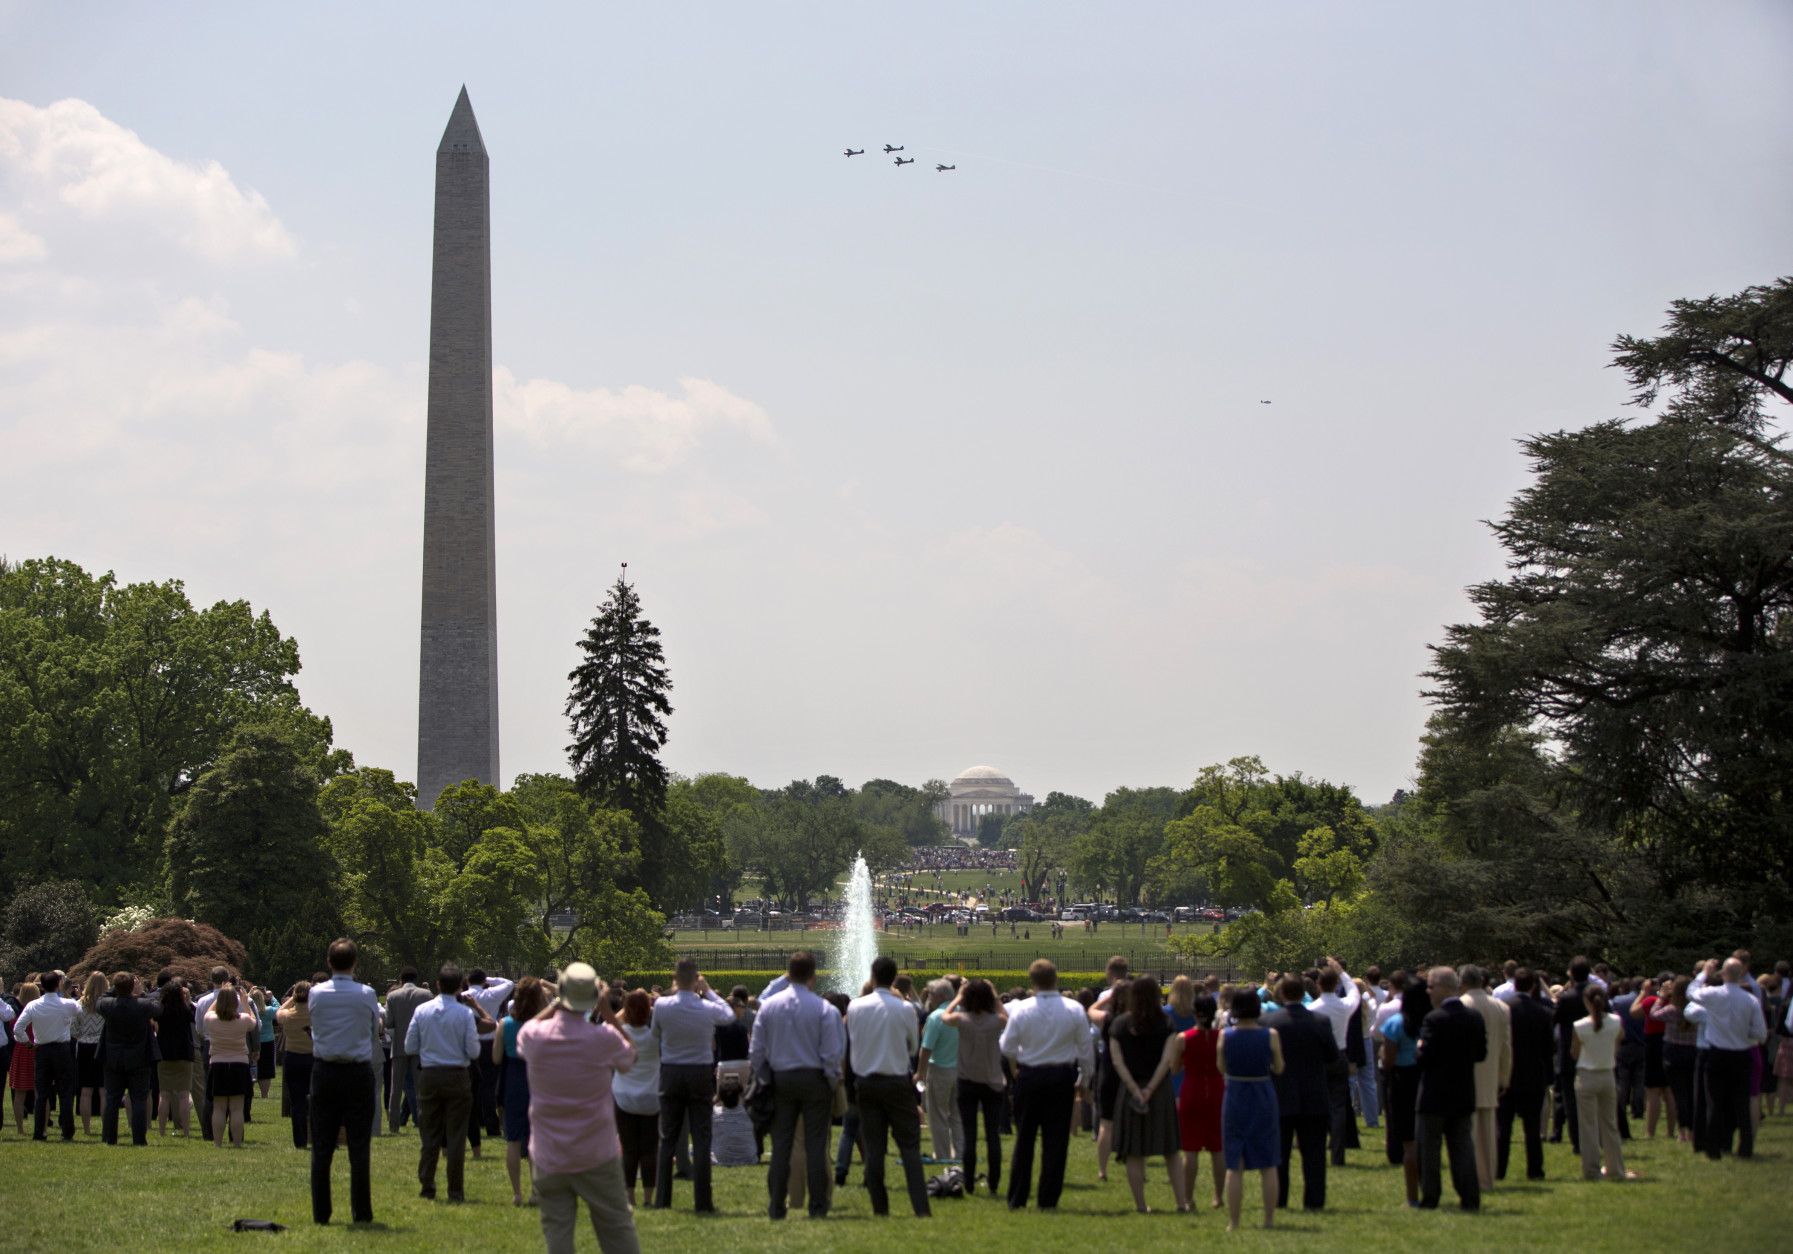 People gather on the South Lawn of the White House in Washington, Friday, May 8, 2015, to watch Vintage military aircraft from World War II fly over the Thomas Jefferson Memorial and the Washington Monument to mark the 70th anniversary of Victory in Europe Day. (AP Photo/Carolyn Kaster)